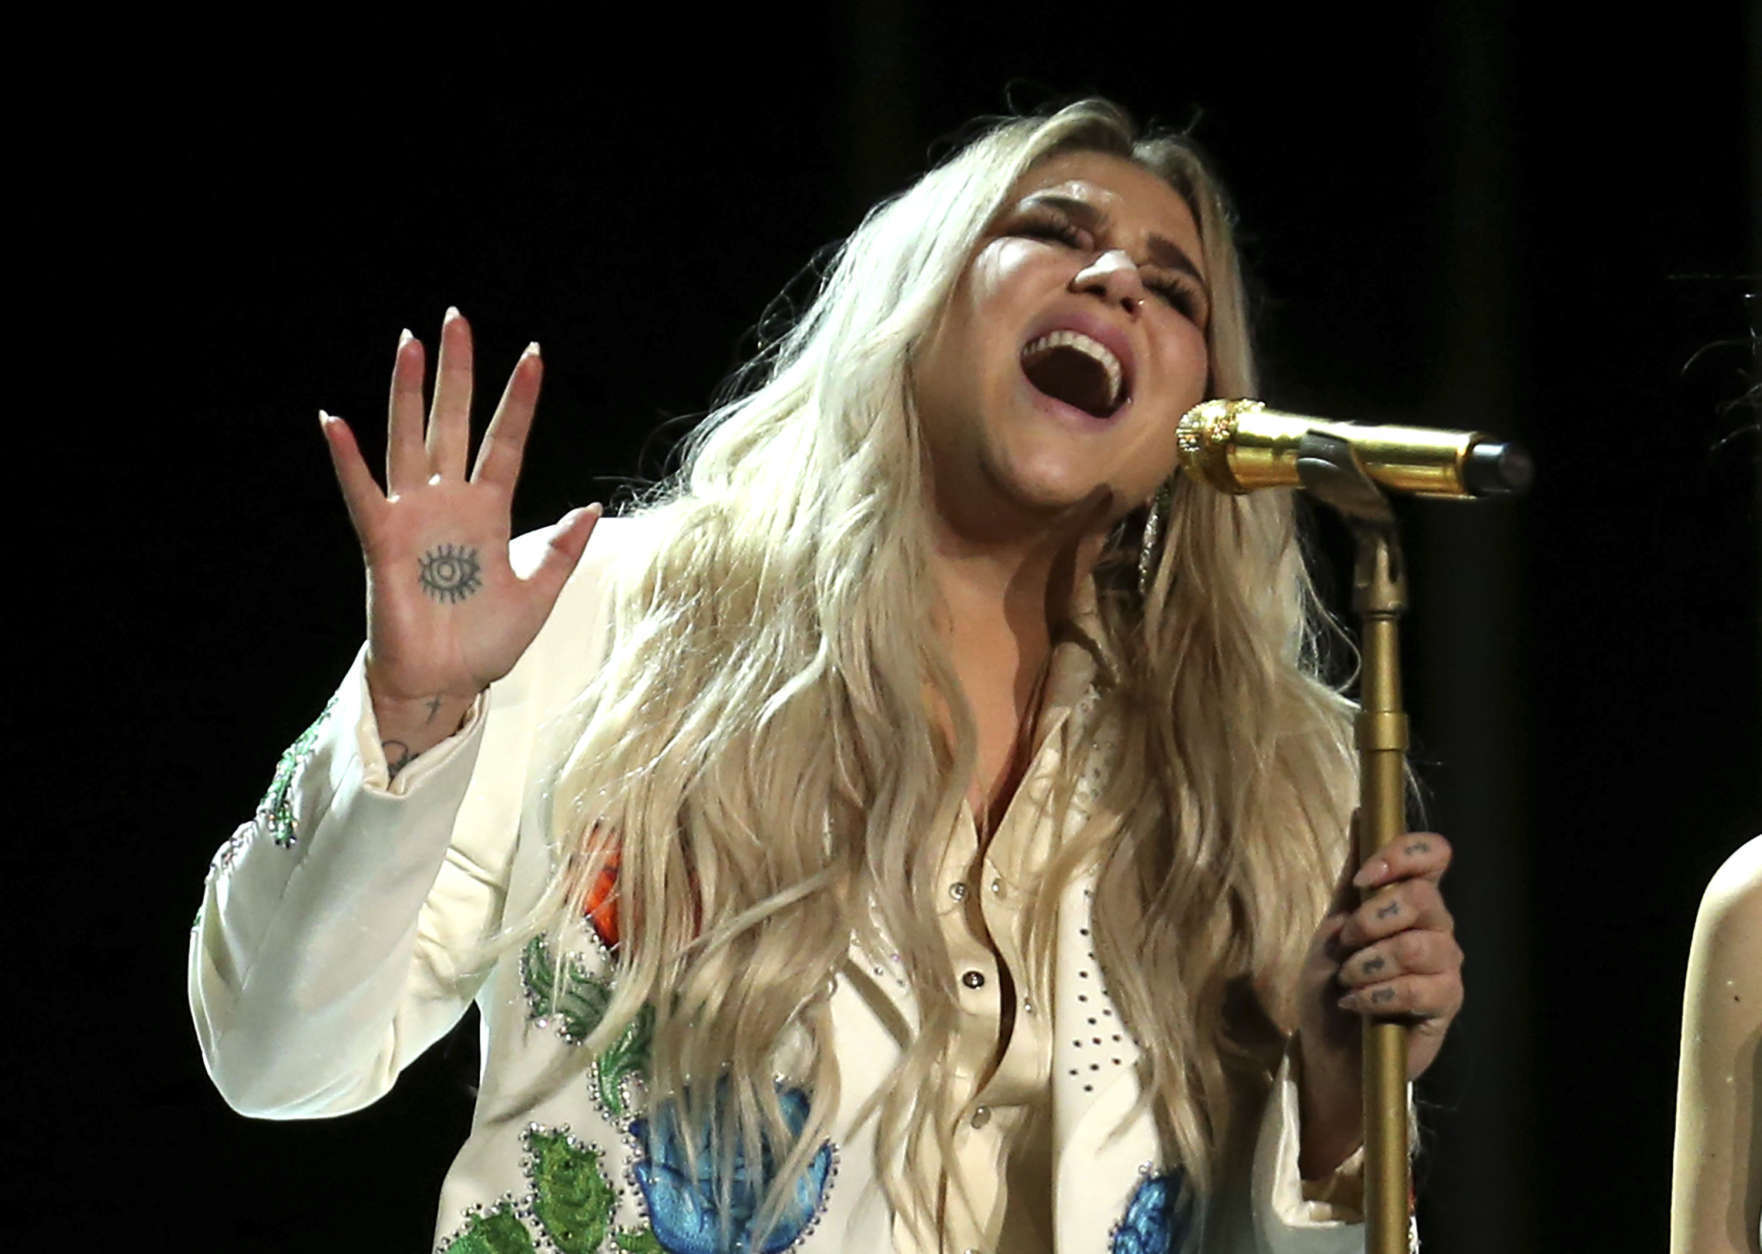 Kesha performs "Praying" at the 60th annual Grammy Awards at Madison Square Garden on Sunday, Jan. 28, 2018, in New York. (Photo by Matt Sayles/Invision/AP)